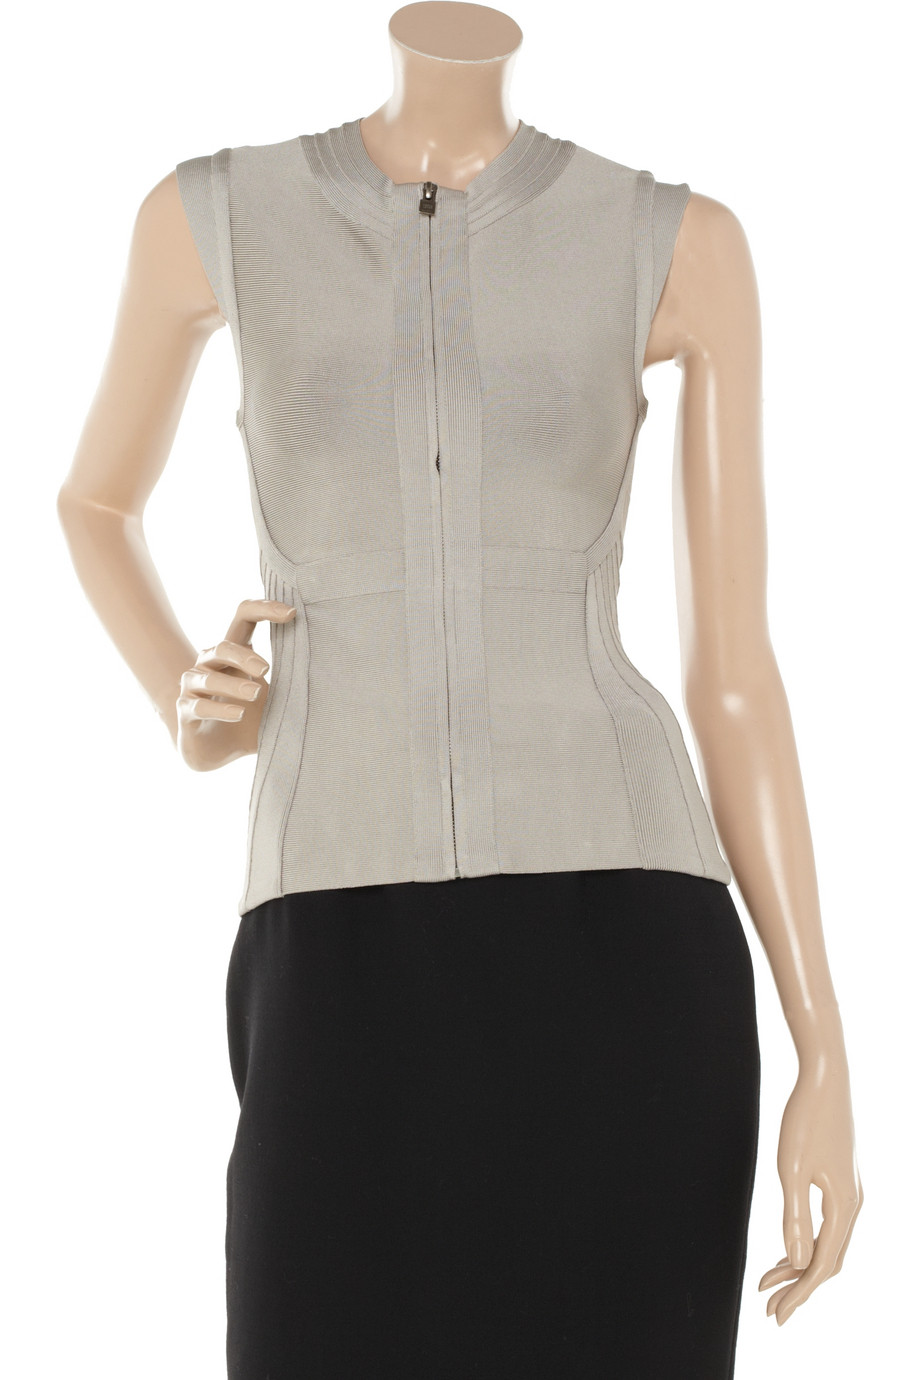 Lyst - Hervé Léger Bandage Top in Gray